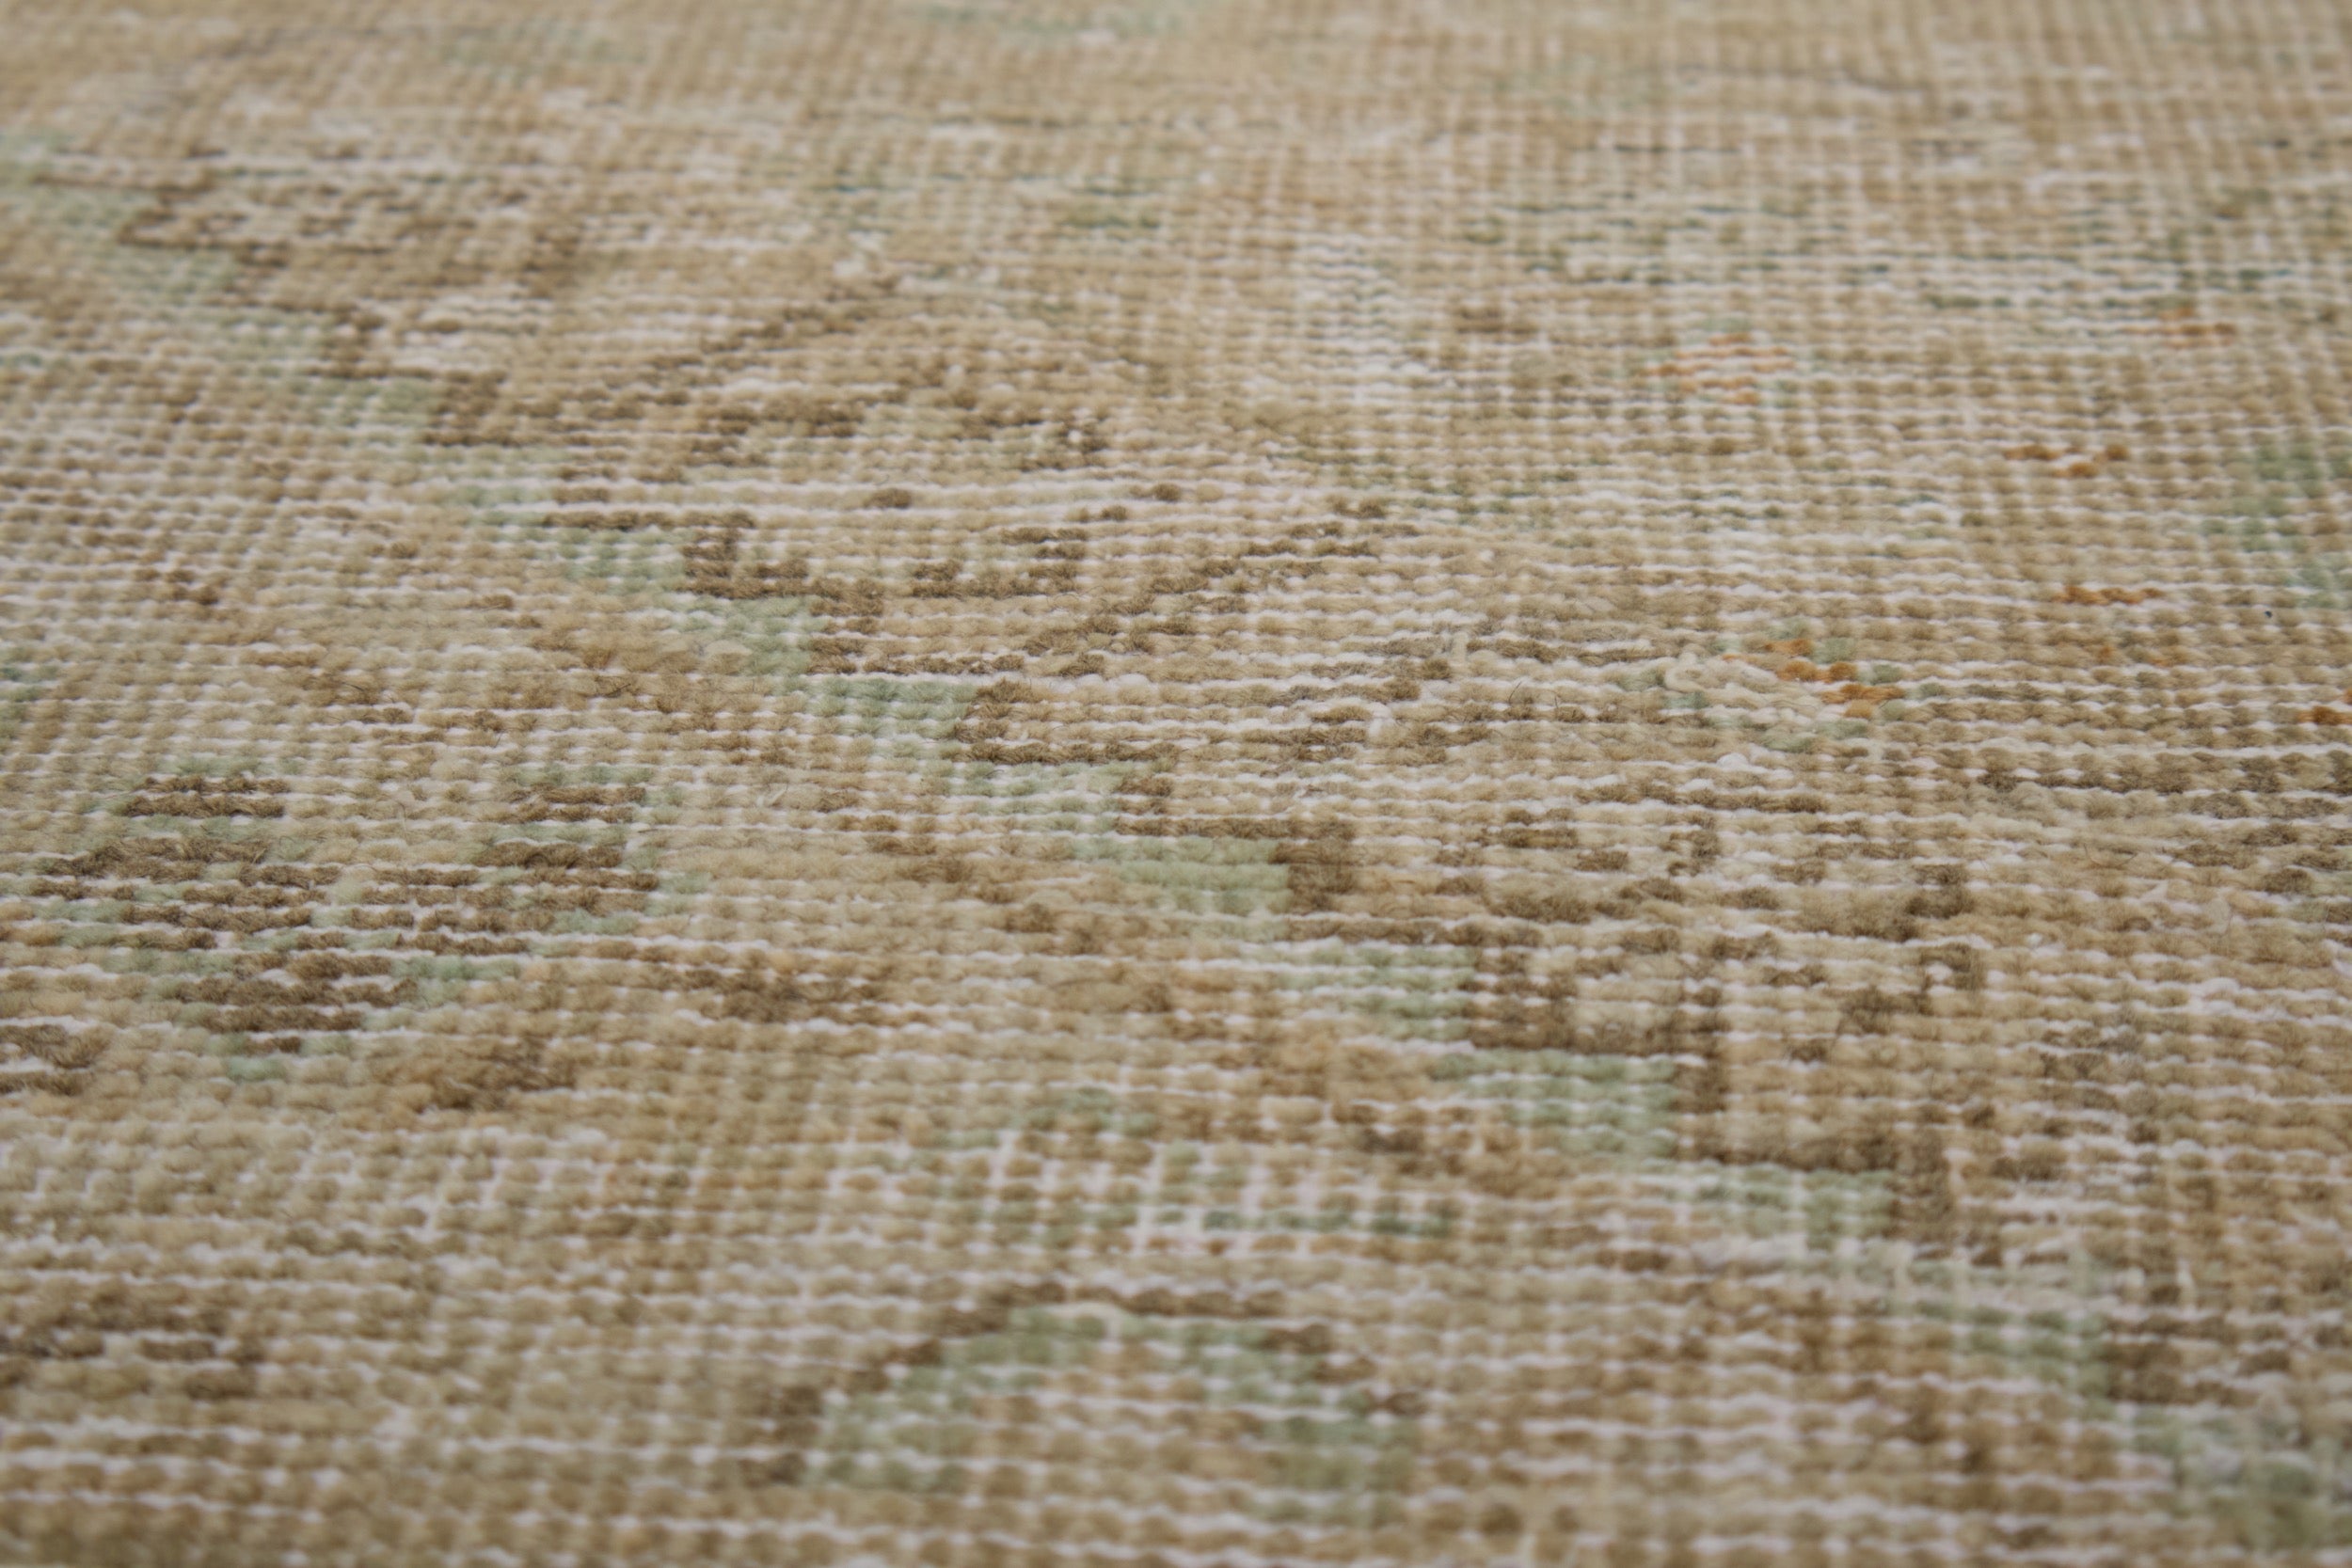 Sabrena - An Antique washed Vision in Soft Cream | Kuden Rugs